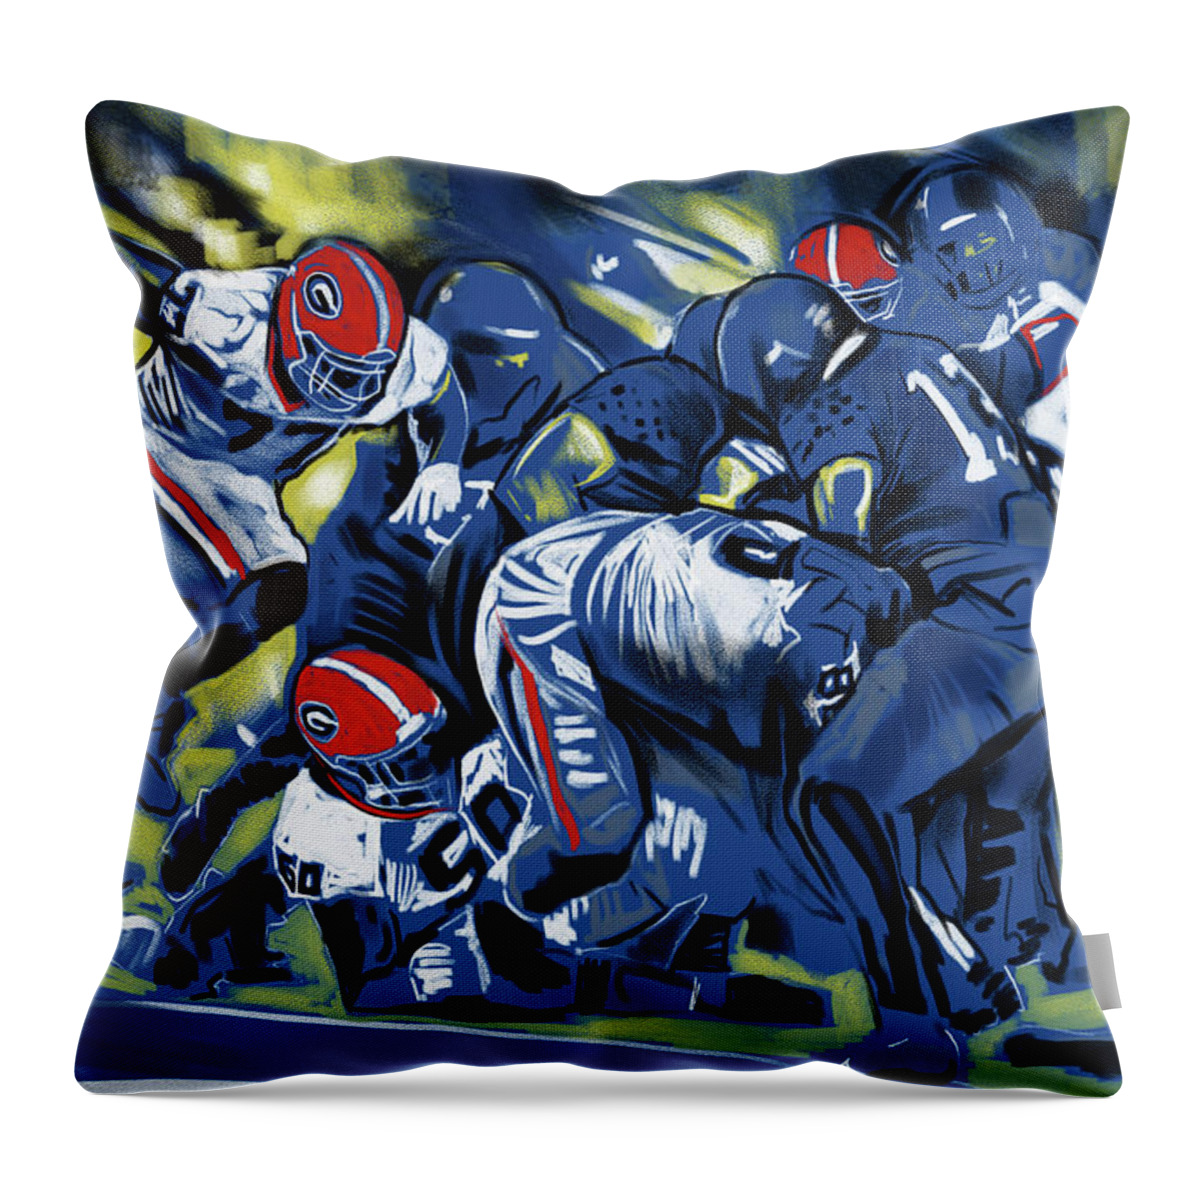 Cold Victory Throw Pillow featuring the painting Cold Victory by John Gholson